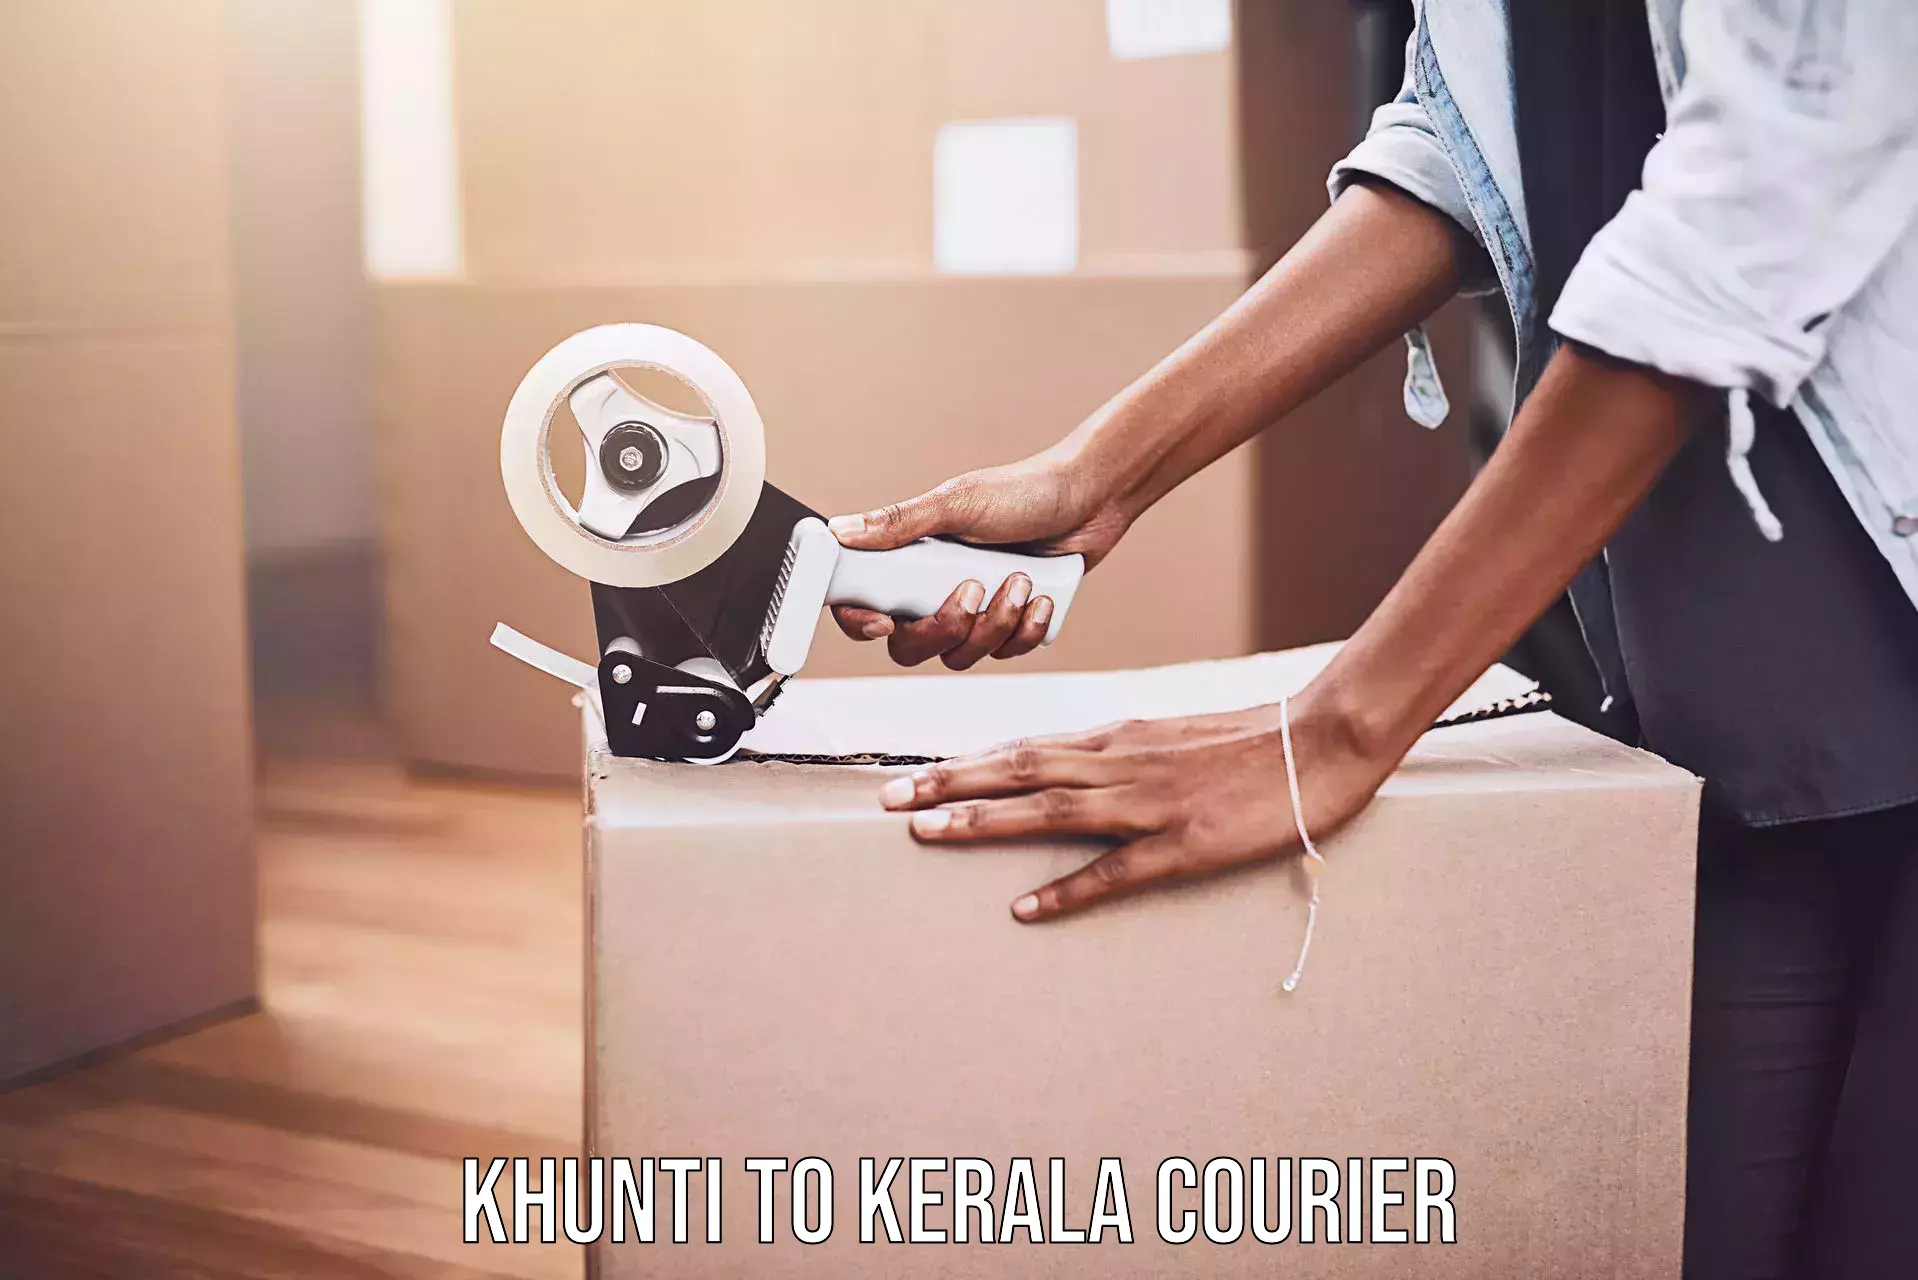 Cash on delivery service Khunti to Trivandrum